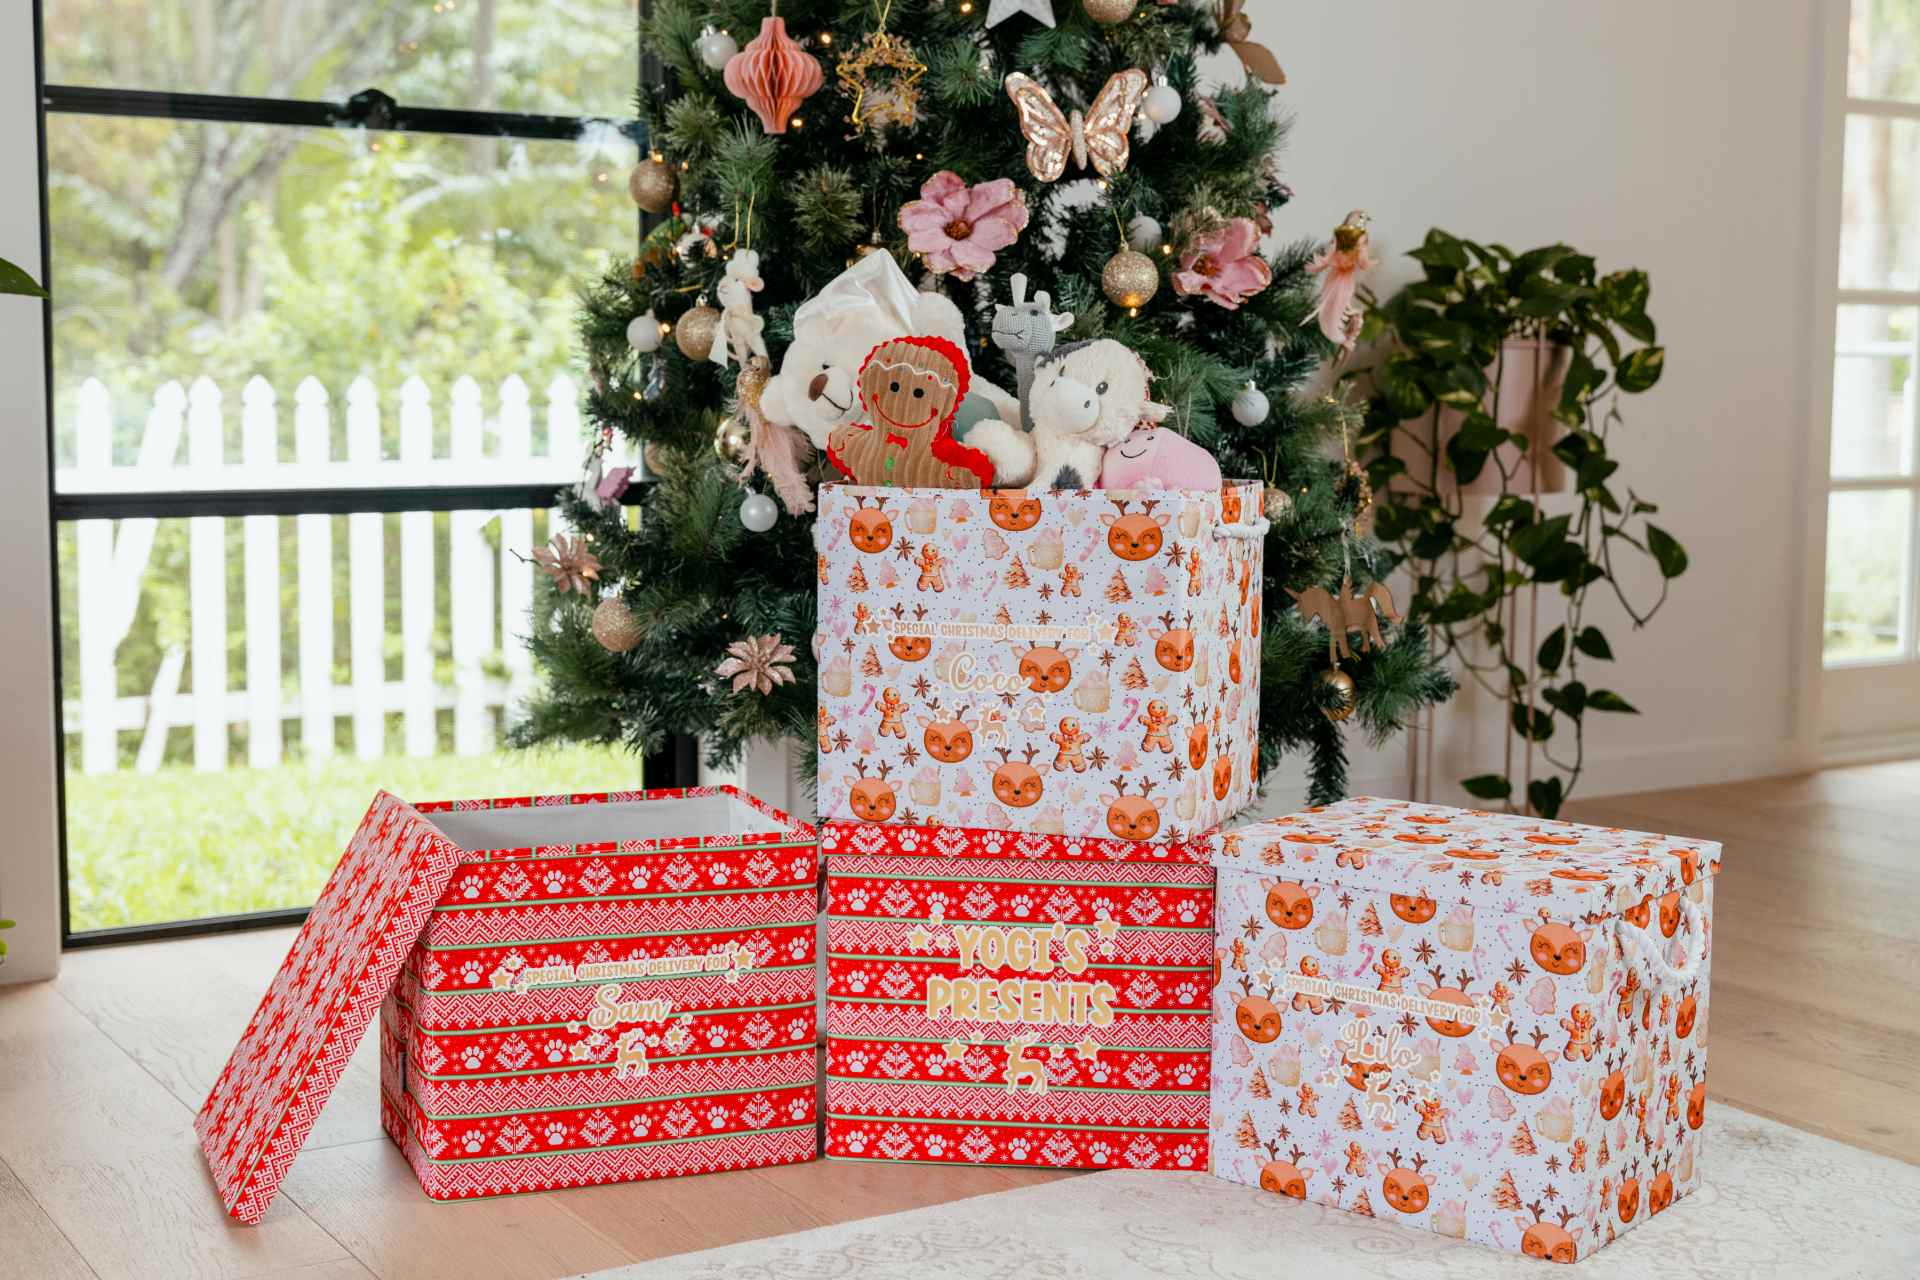 Pawfect Pals Christmas gift boxes.